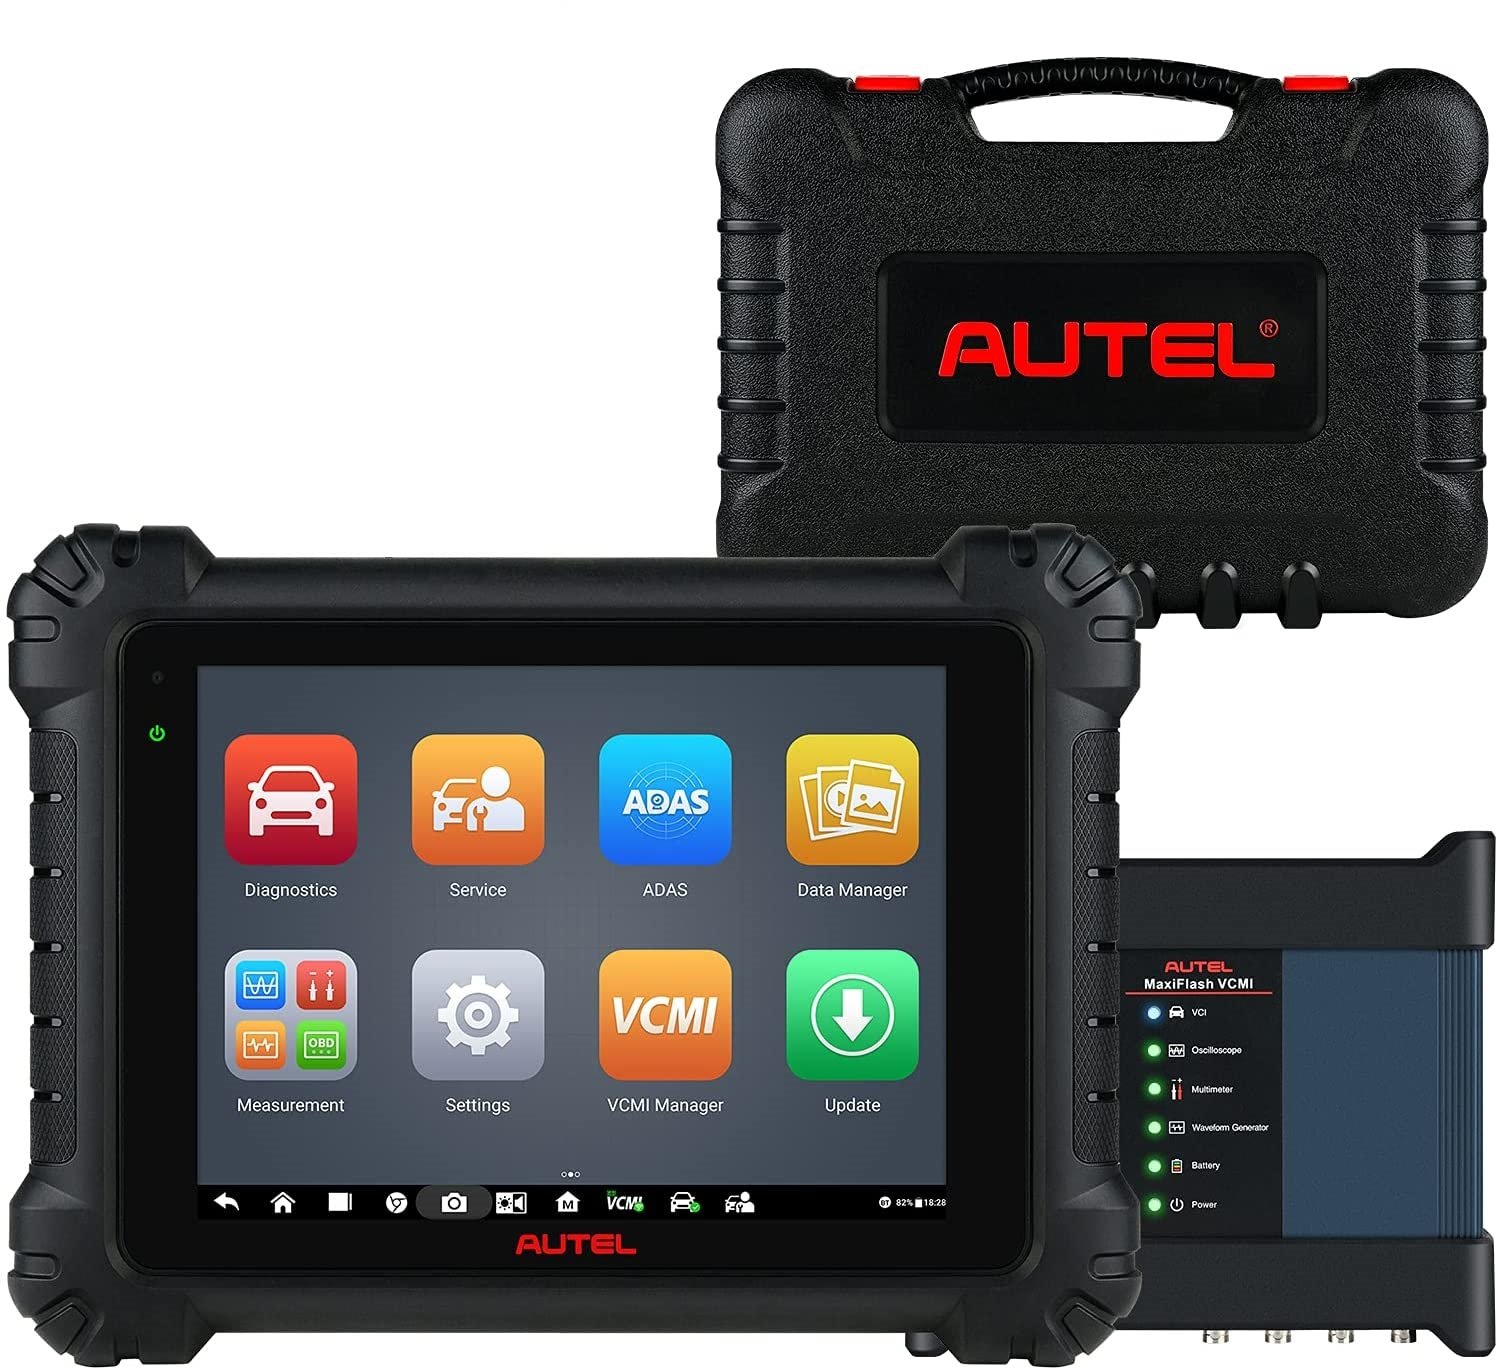 Autel MaxiSYS Diagnostic Tablet & VCMI MS919, Substantial 128GB built-in memory